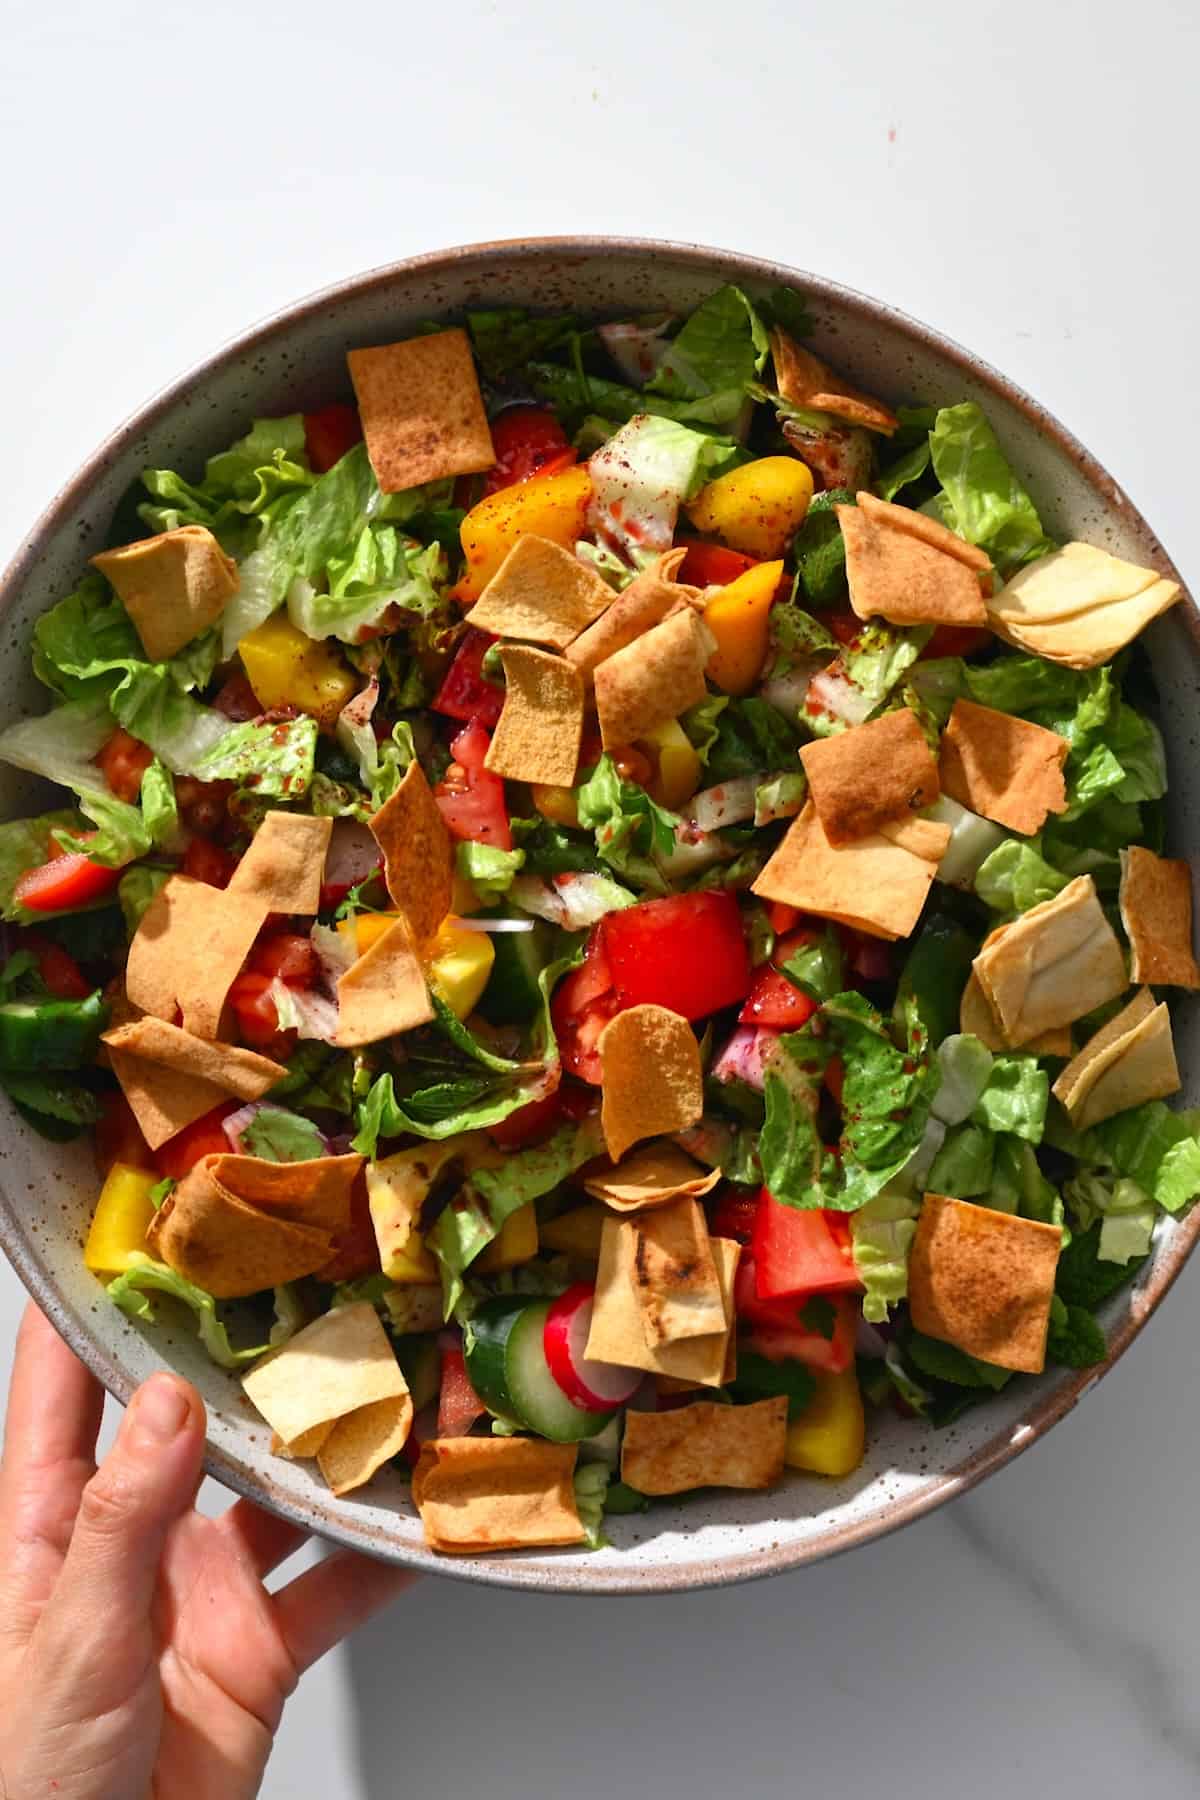 Homemade fattoush salad topped with pita chips in a bowl